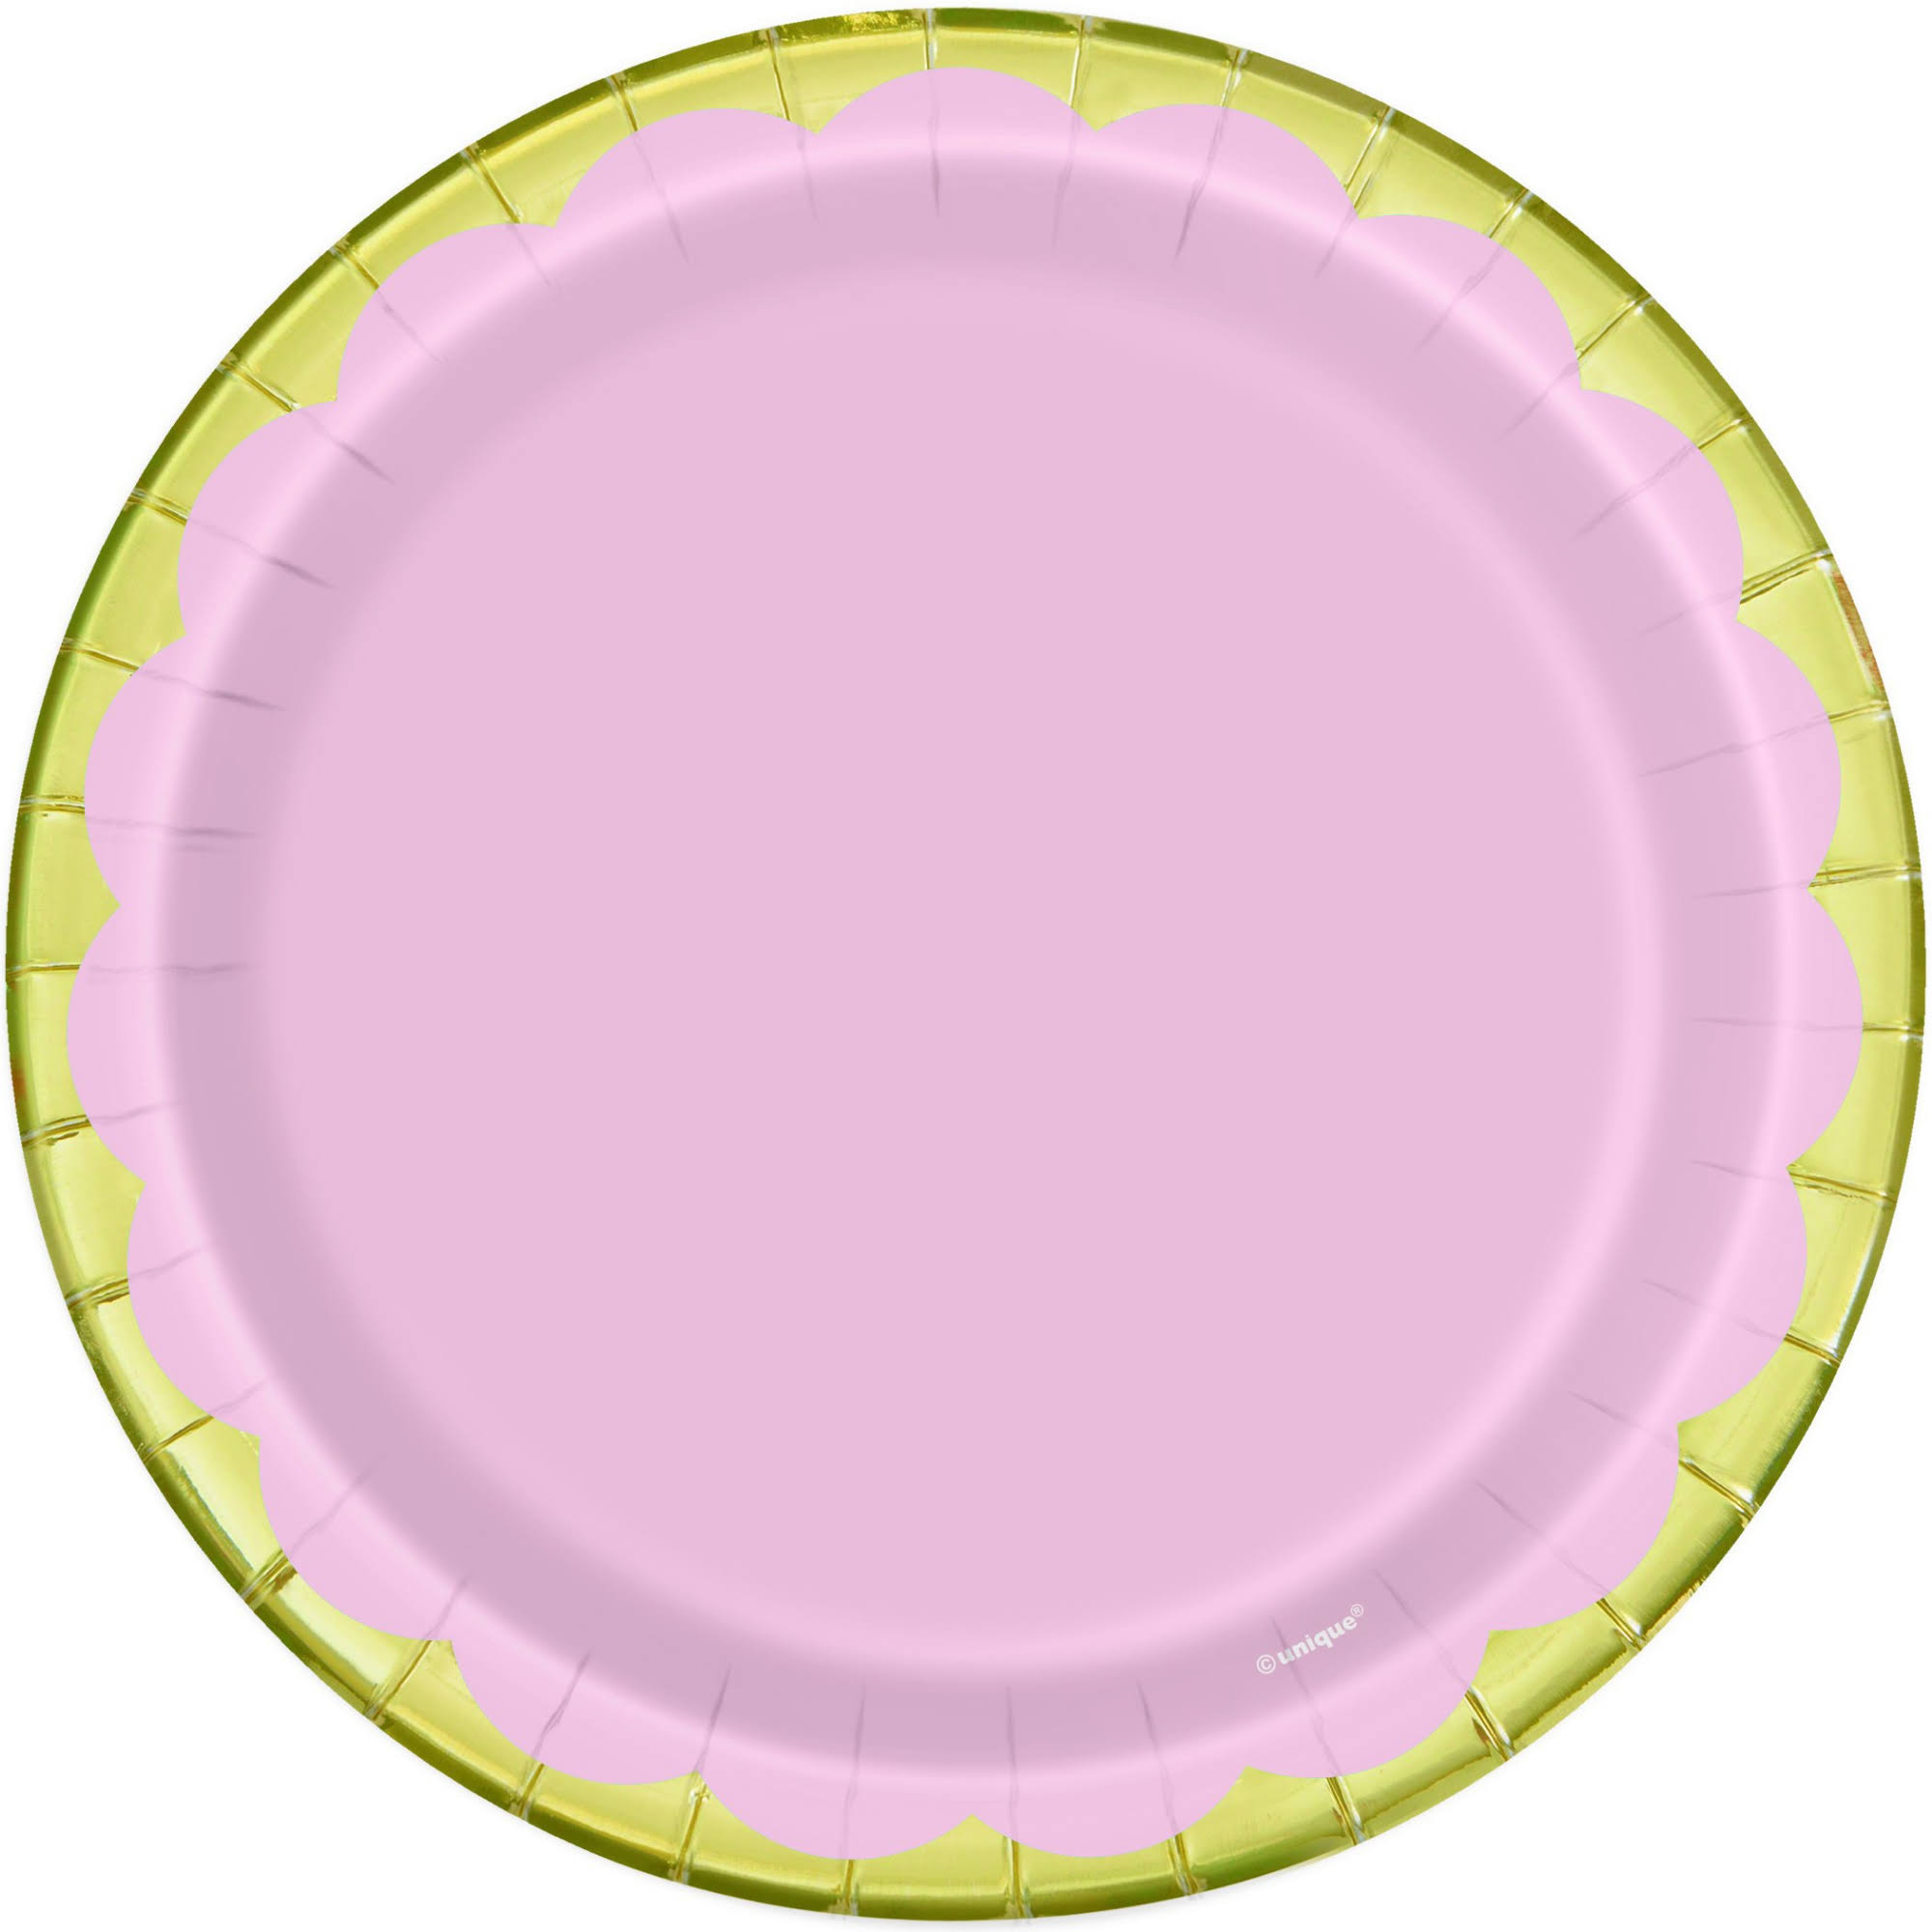 Scalloped Gold & Light Pink Party Plates, 8 CT, 7 in